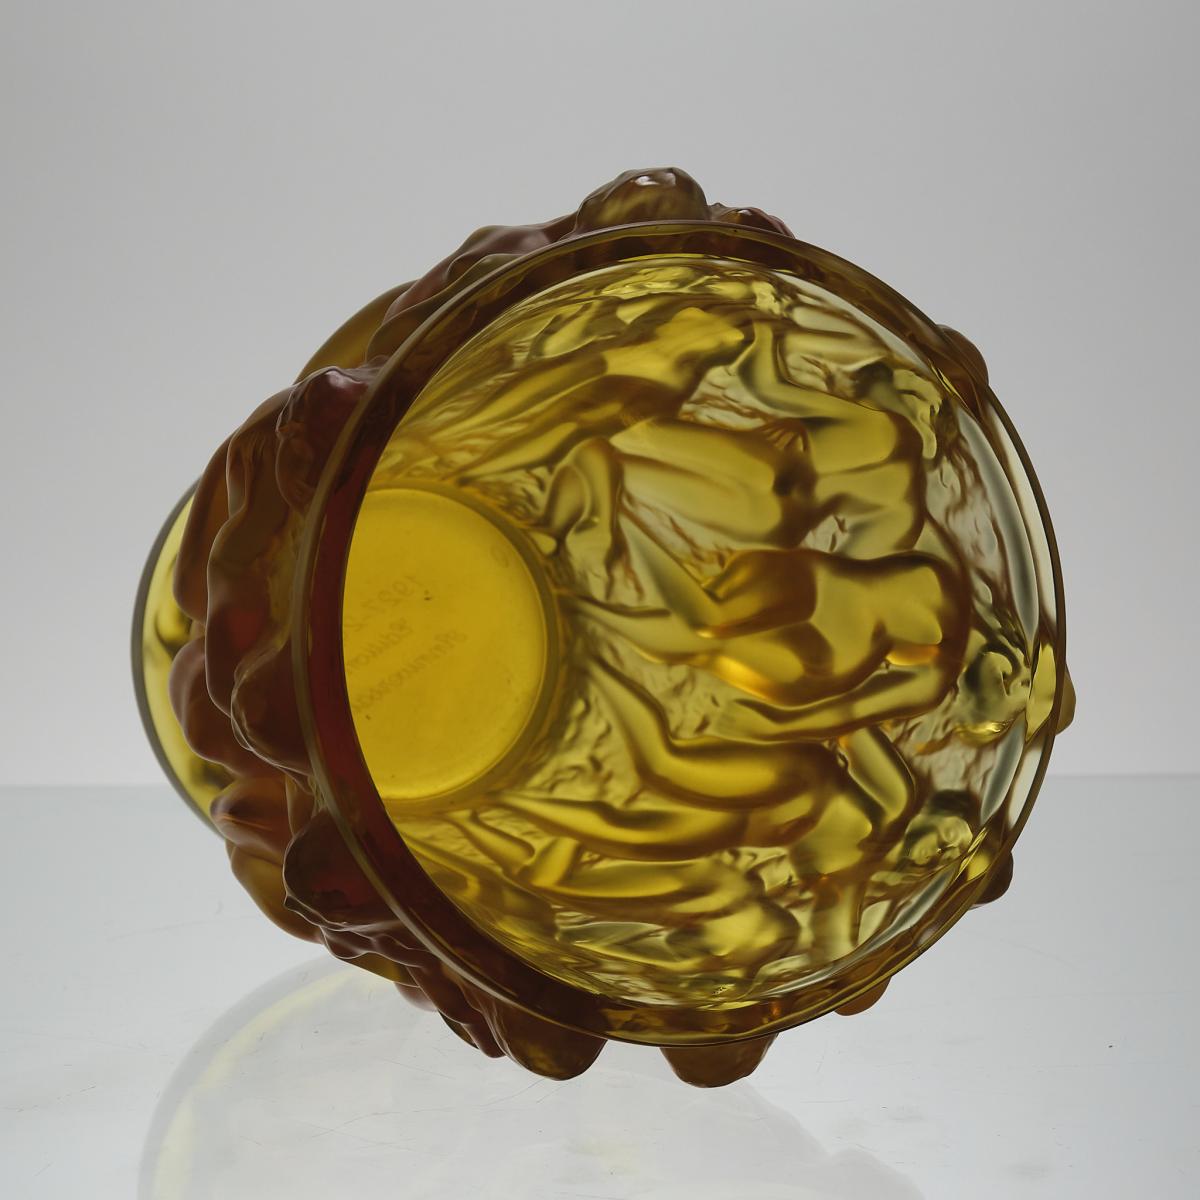 Limited Anniversary Edition Amber Crystal Glass "Bacchantes Vase" by Lalique